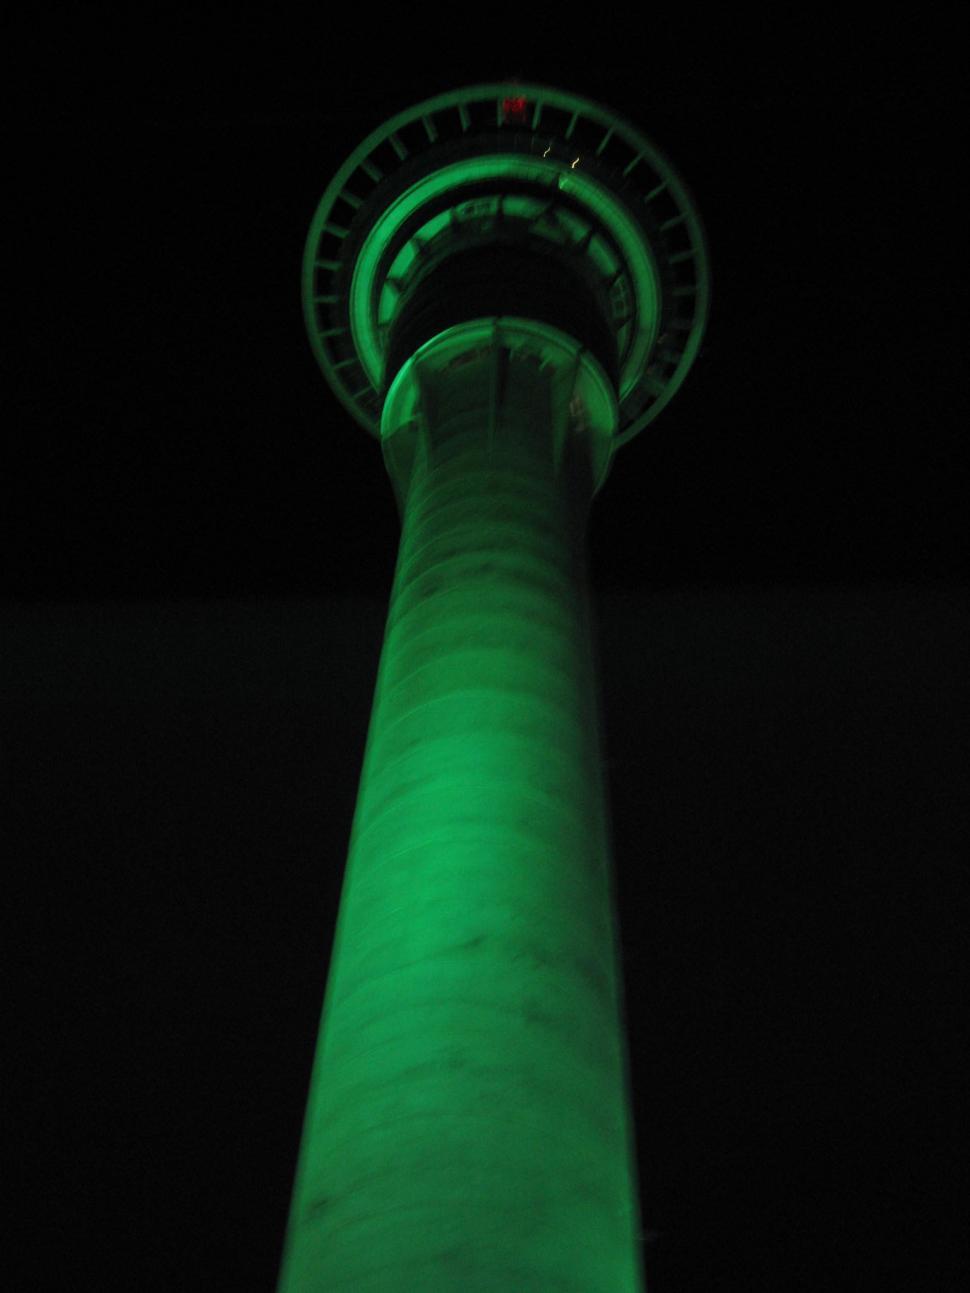 Free Image of Tower With Green Light 